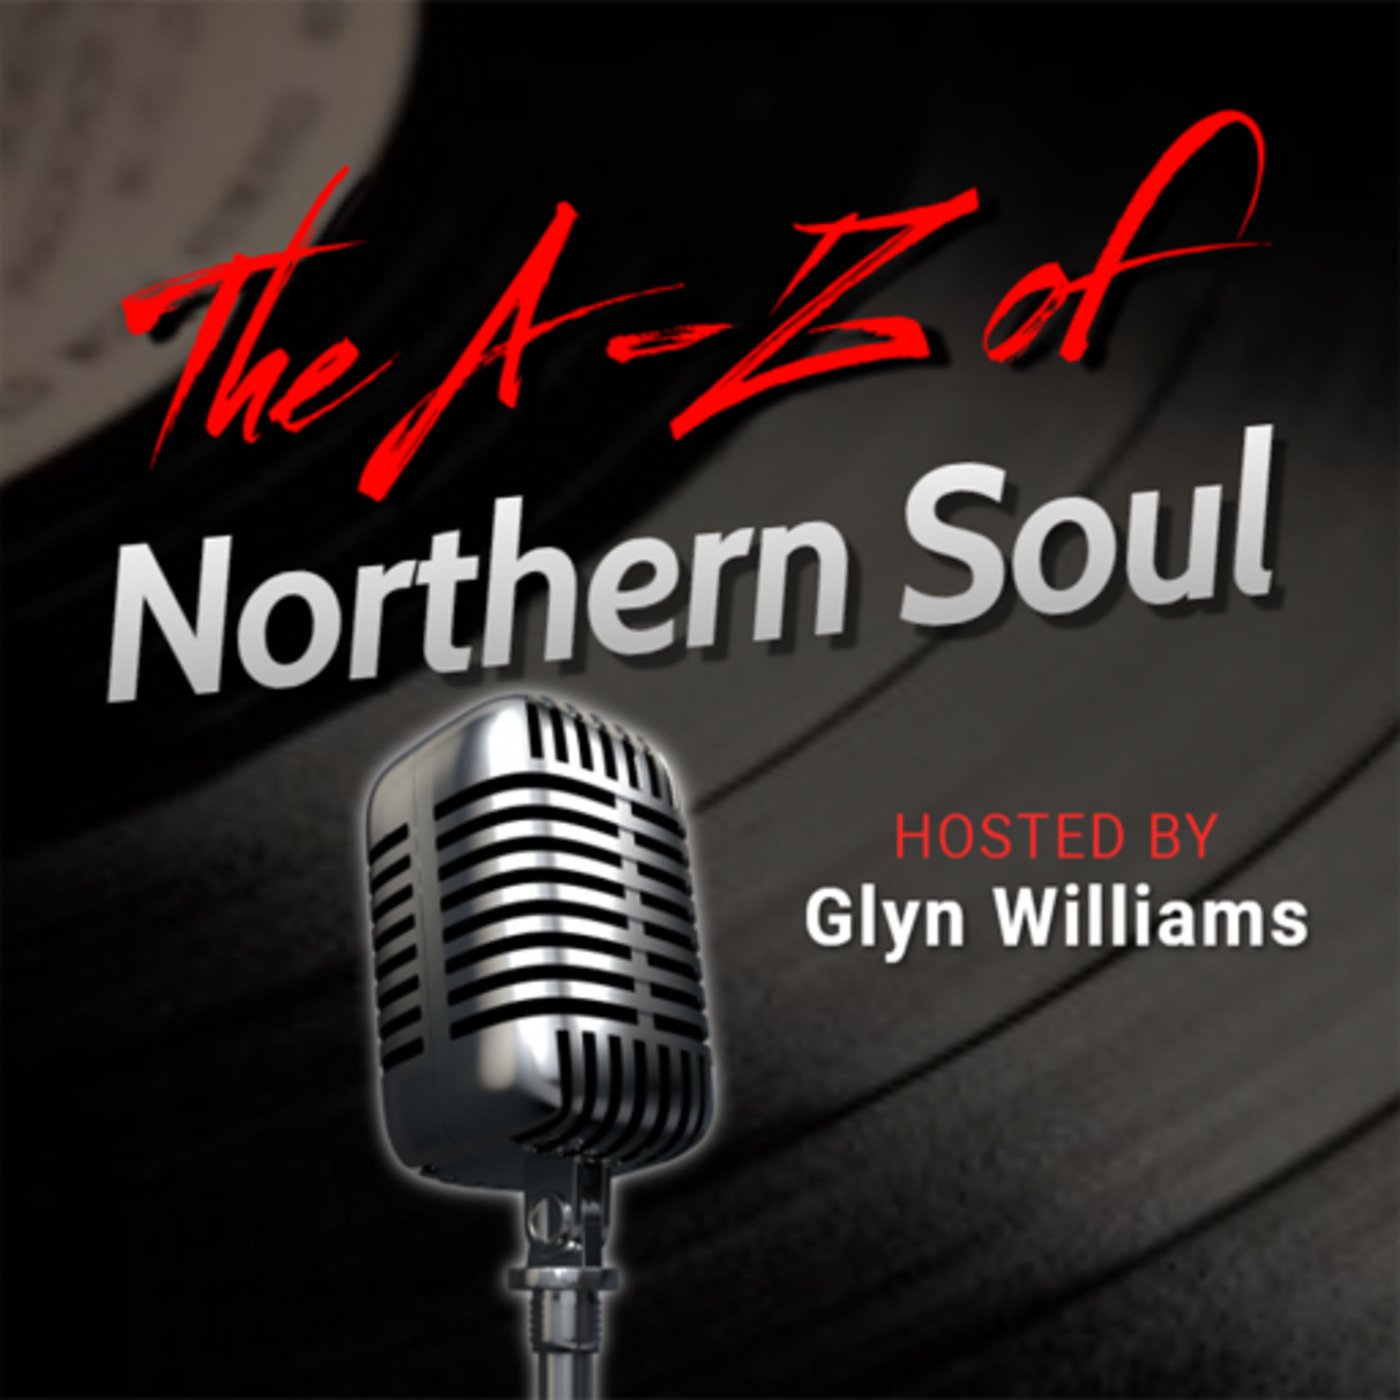 The A-Z of Northern Soul E038